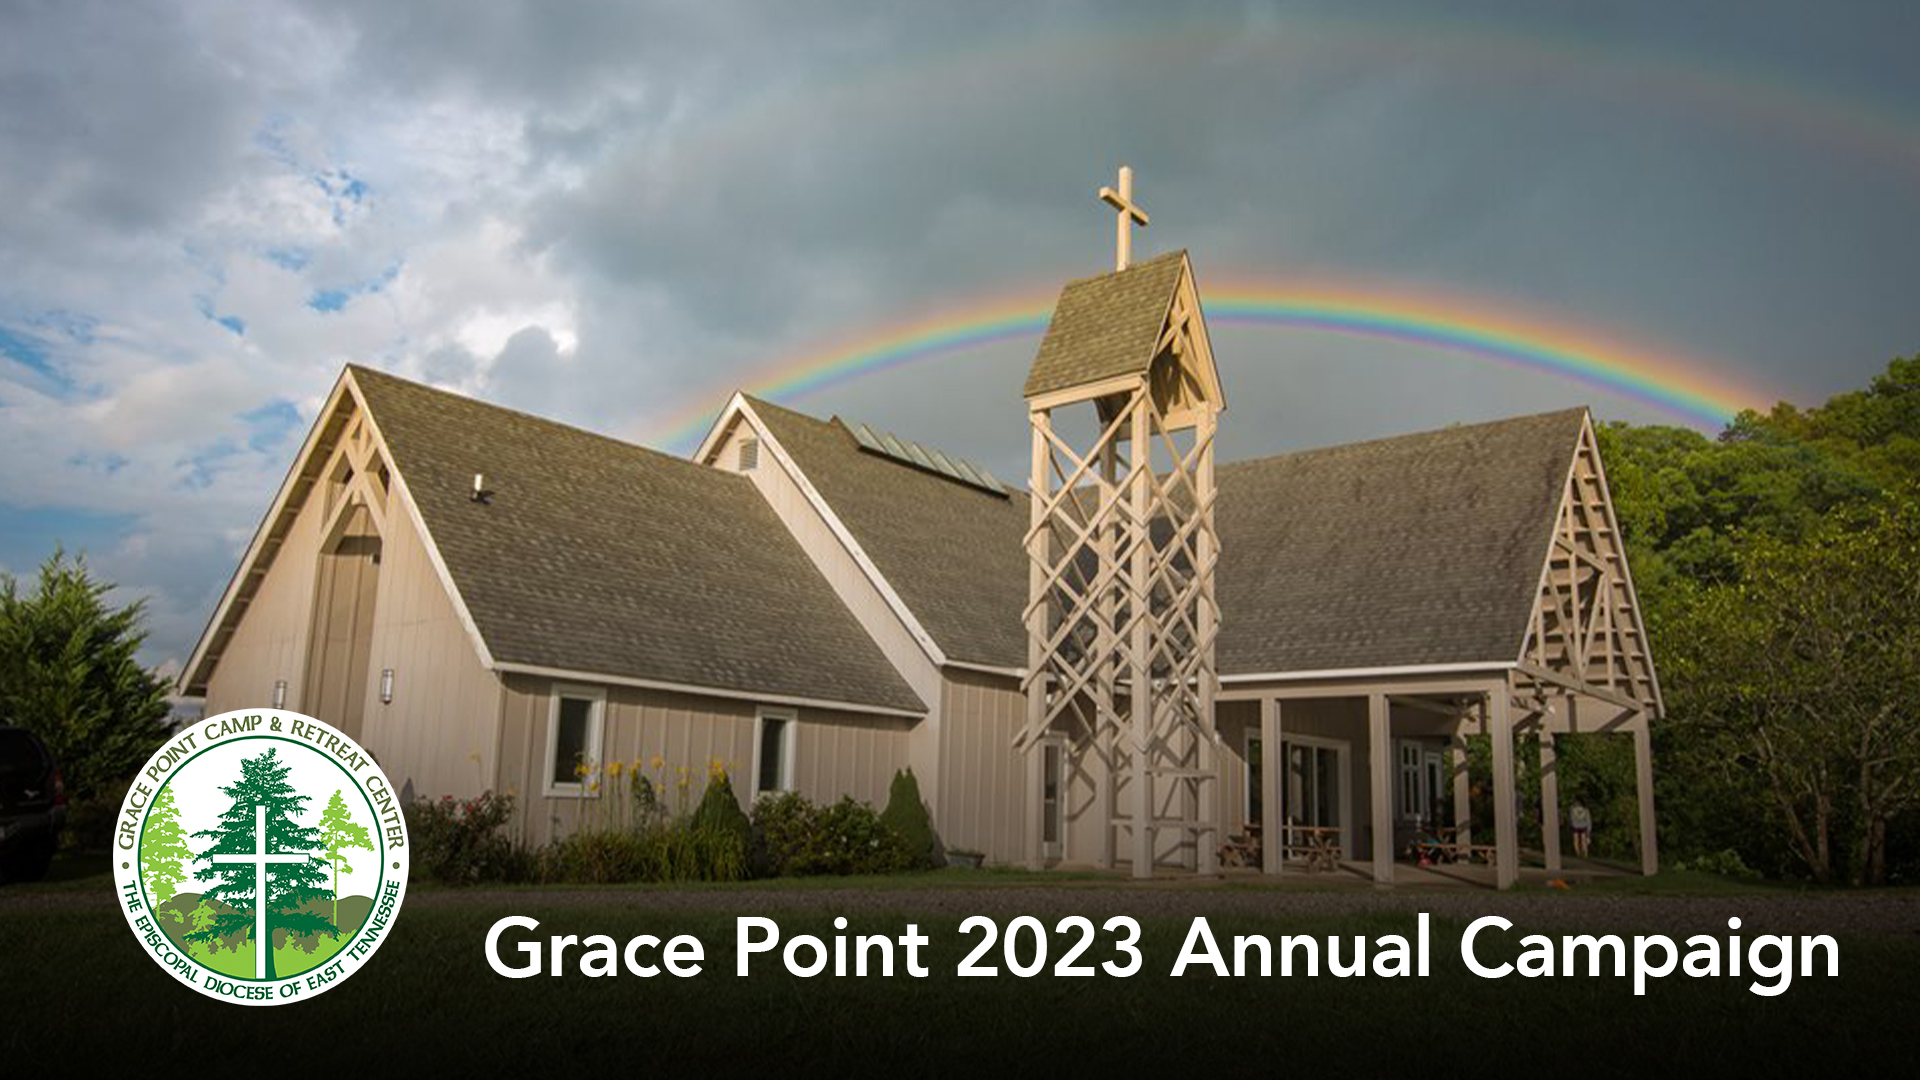 Grace Point 2023 Annual Campaign